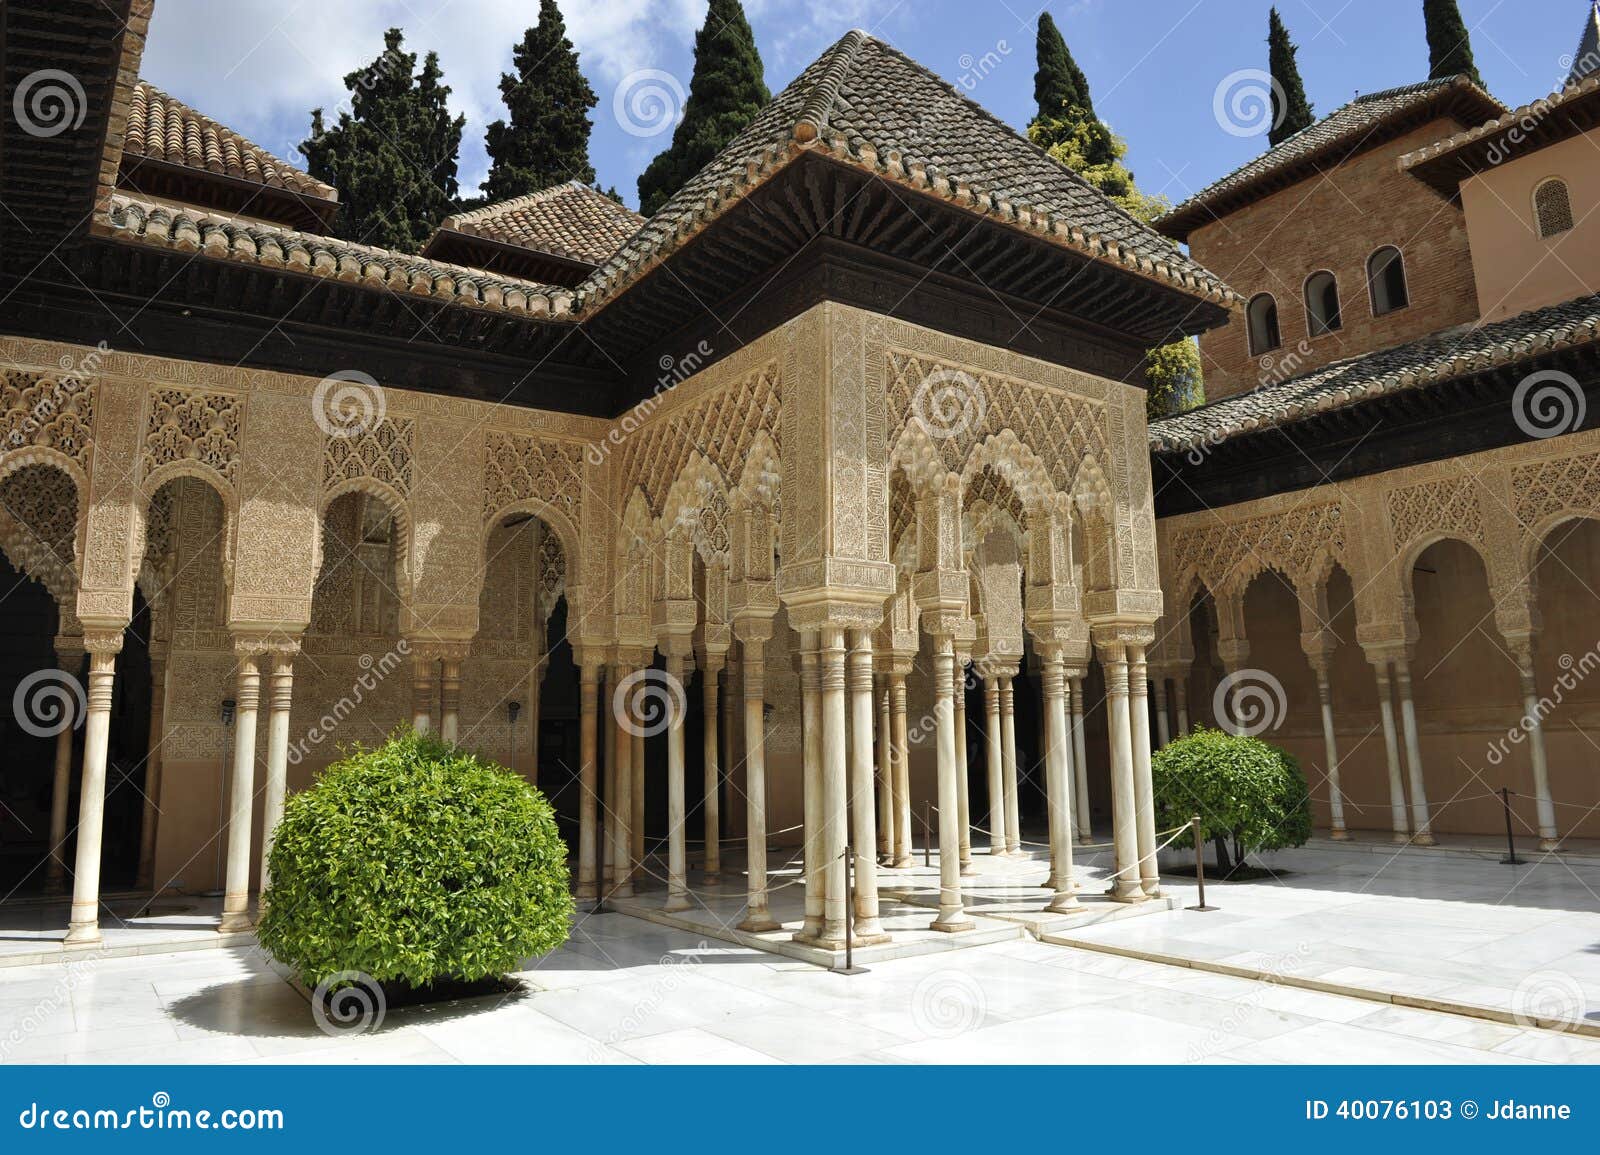 alhambra, palace of lions, granada, spain